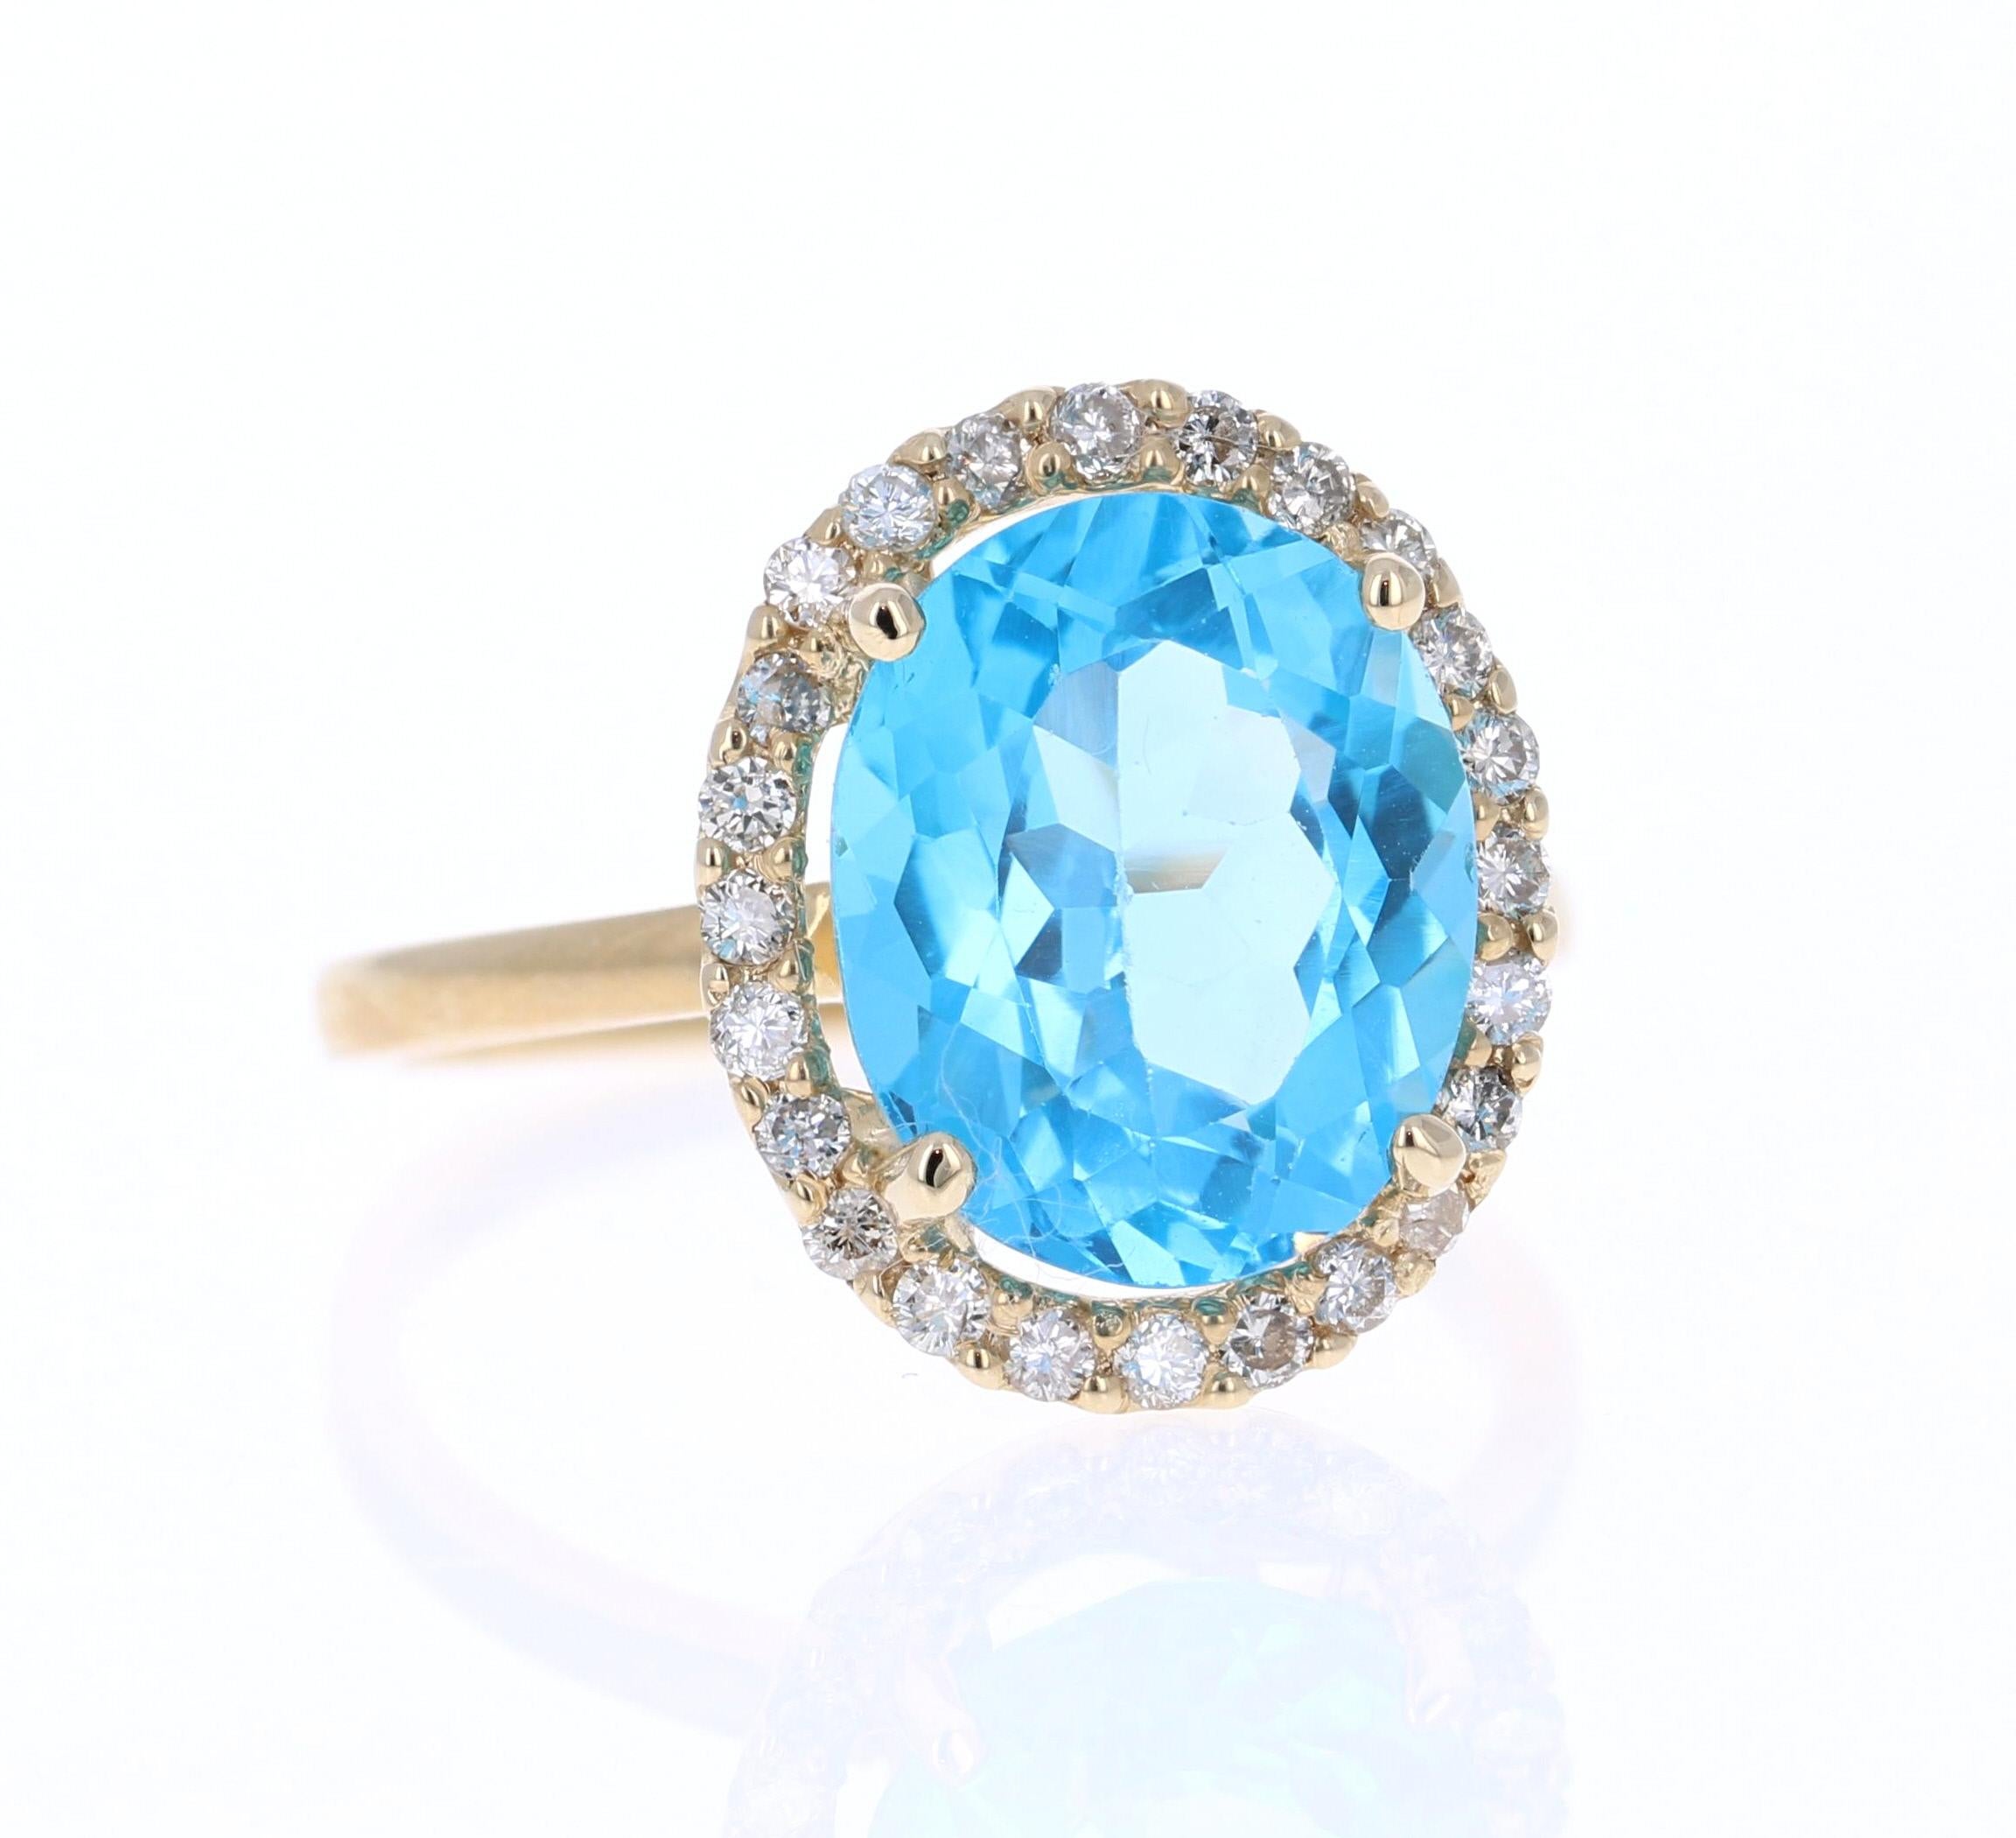 This beautiful Oval cut Blue Topaz and Diamond ring has a stunning 6.01 Carat Blue Topaz and its surrounded by 24 Round Cut Diamonds that weigh 0.36 Carats. The total carat weight of the ring is 6.37 Carats. 

The setting is crafted in 14K Yellow